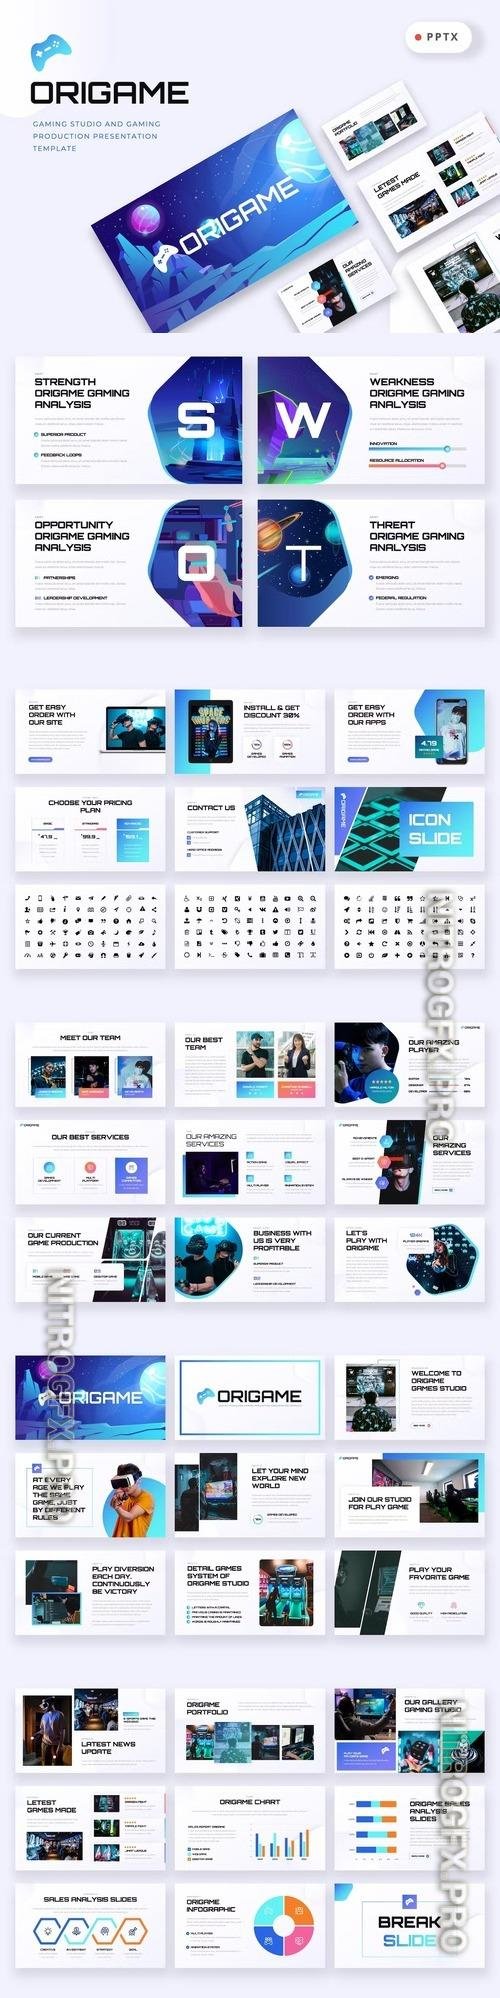 ORIGAME - Gaming Studio Powerpoint Template